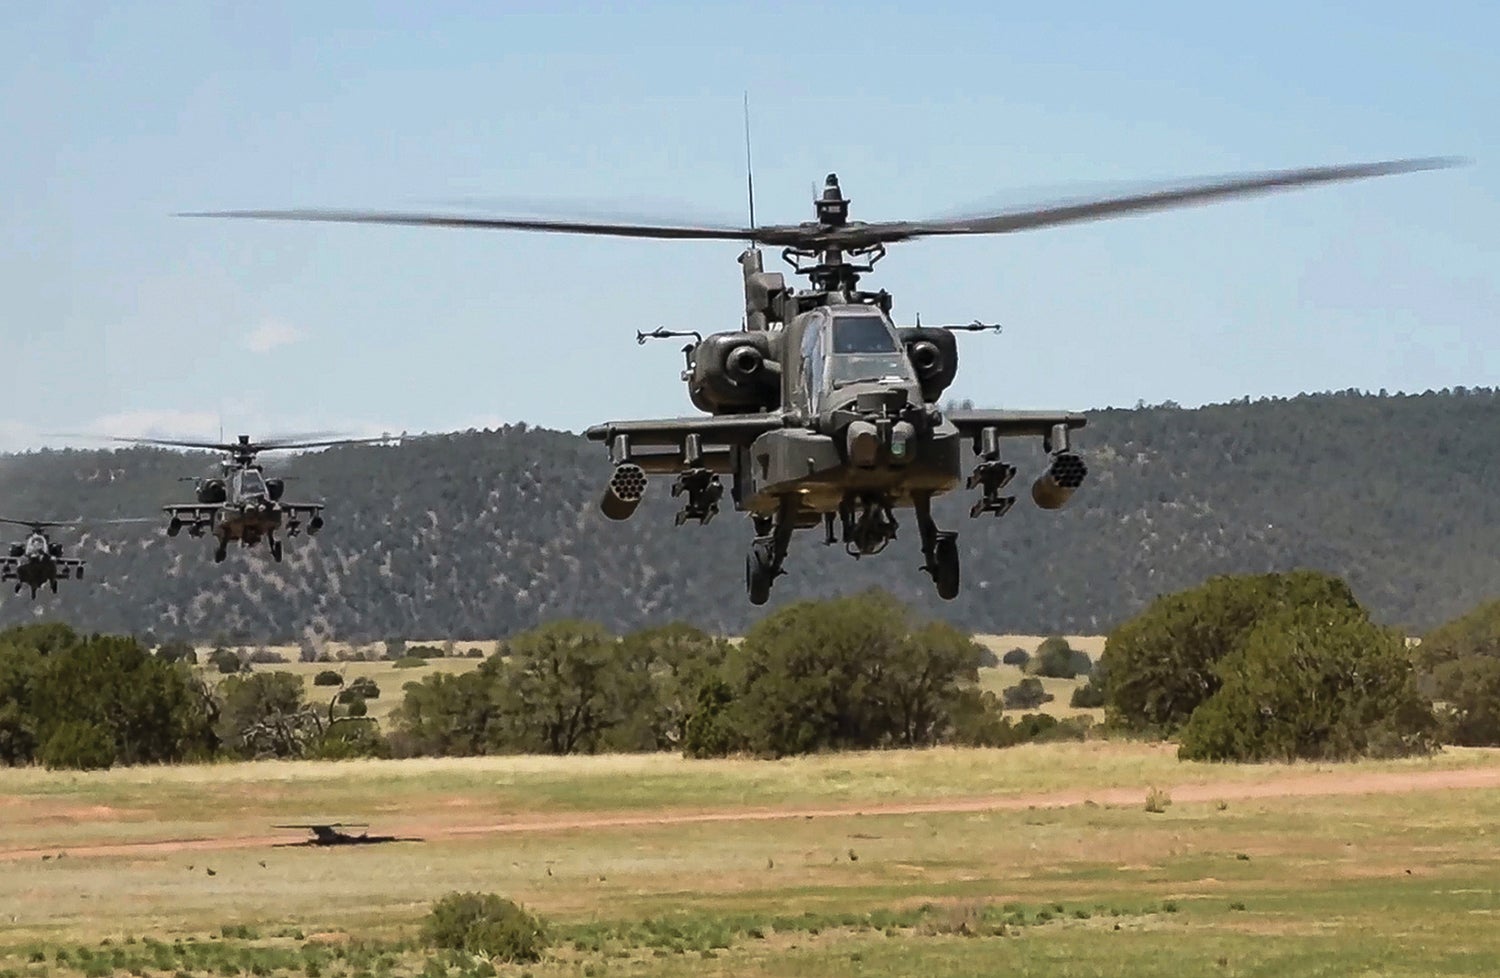 Apache helicopters approach a target area during Ivy Mass. (Credit: U.S. Army/Spc. Tyler Brock)